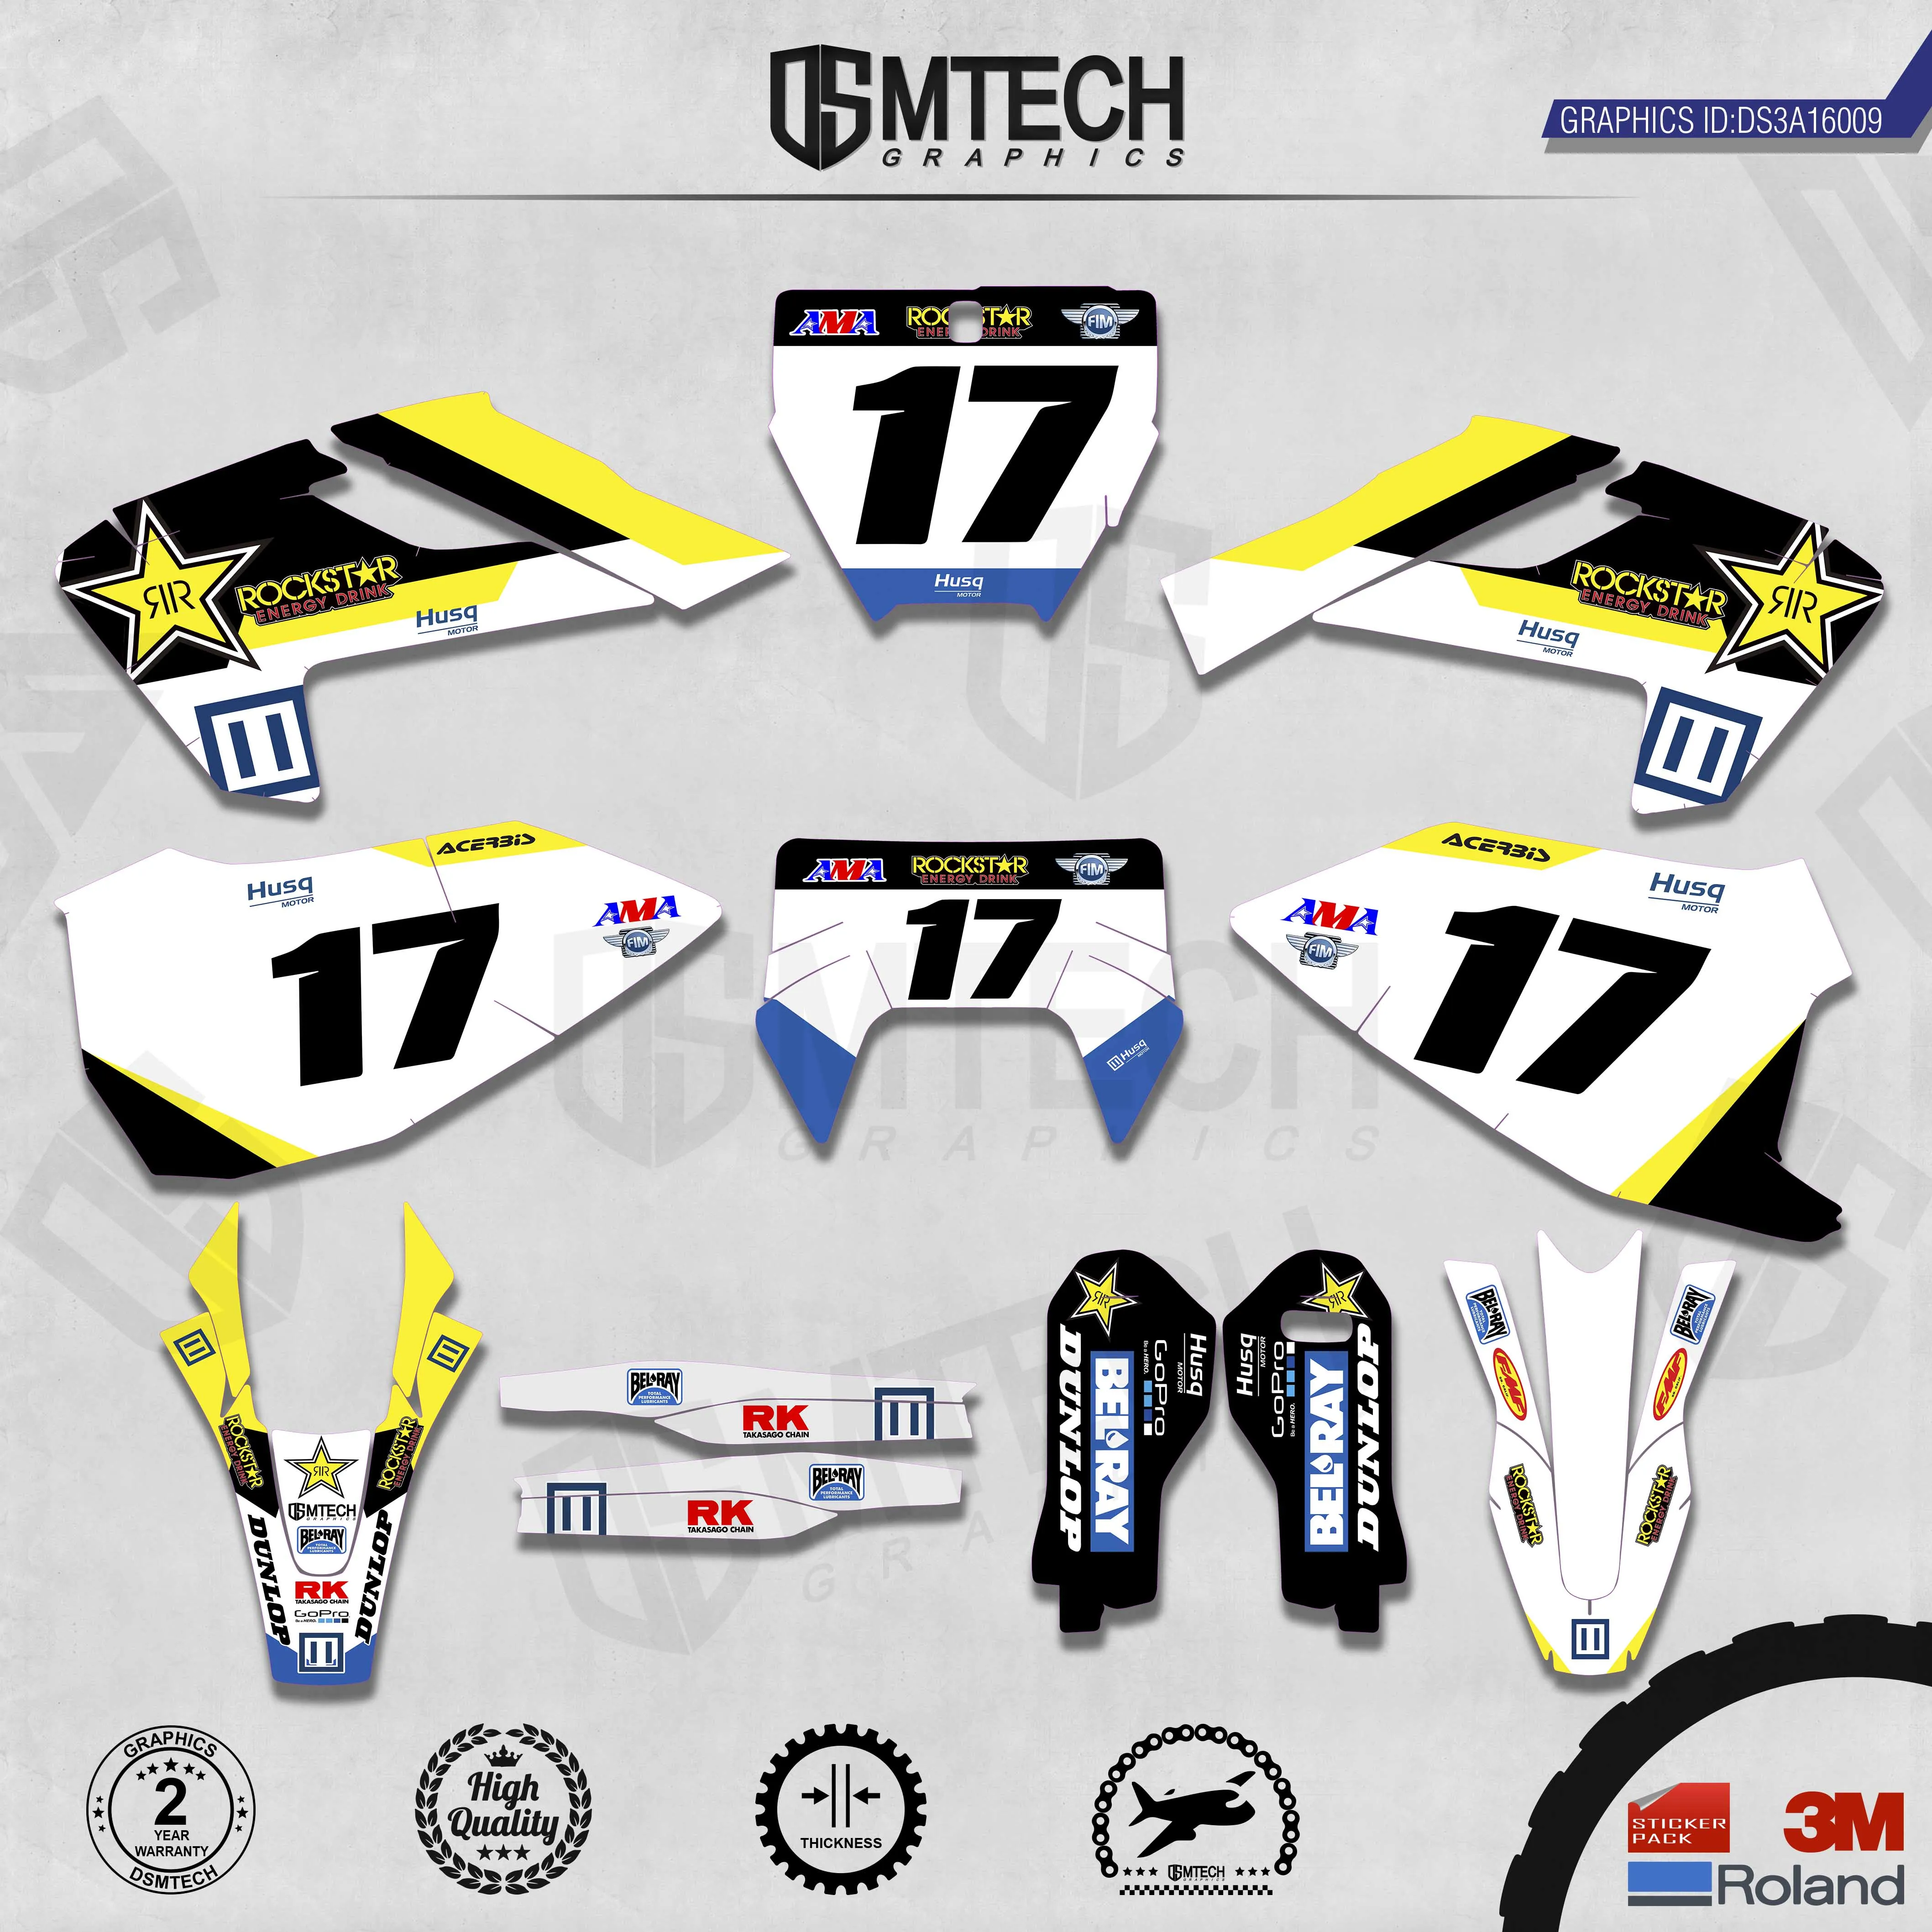 DSMTECH Customized Team Graphics Backgrounds Decals 3M Custom Stickers For TC FC TX FX FS 2016-2018  TE FE 2017-2019  009